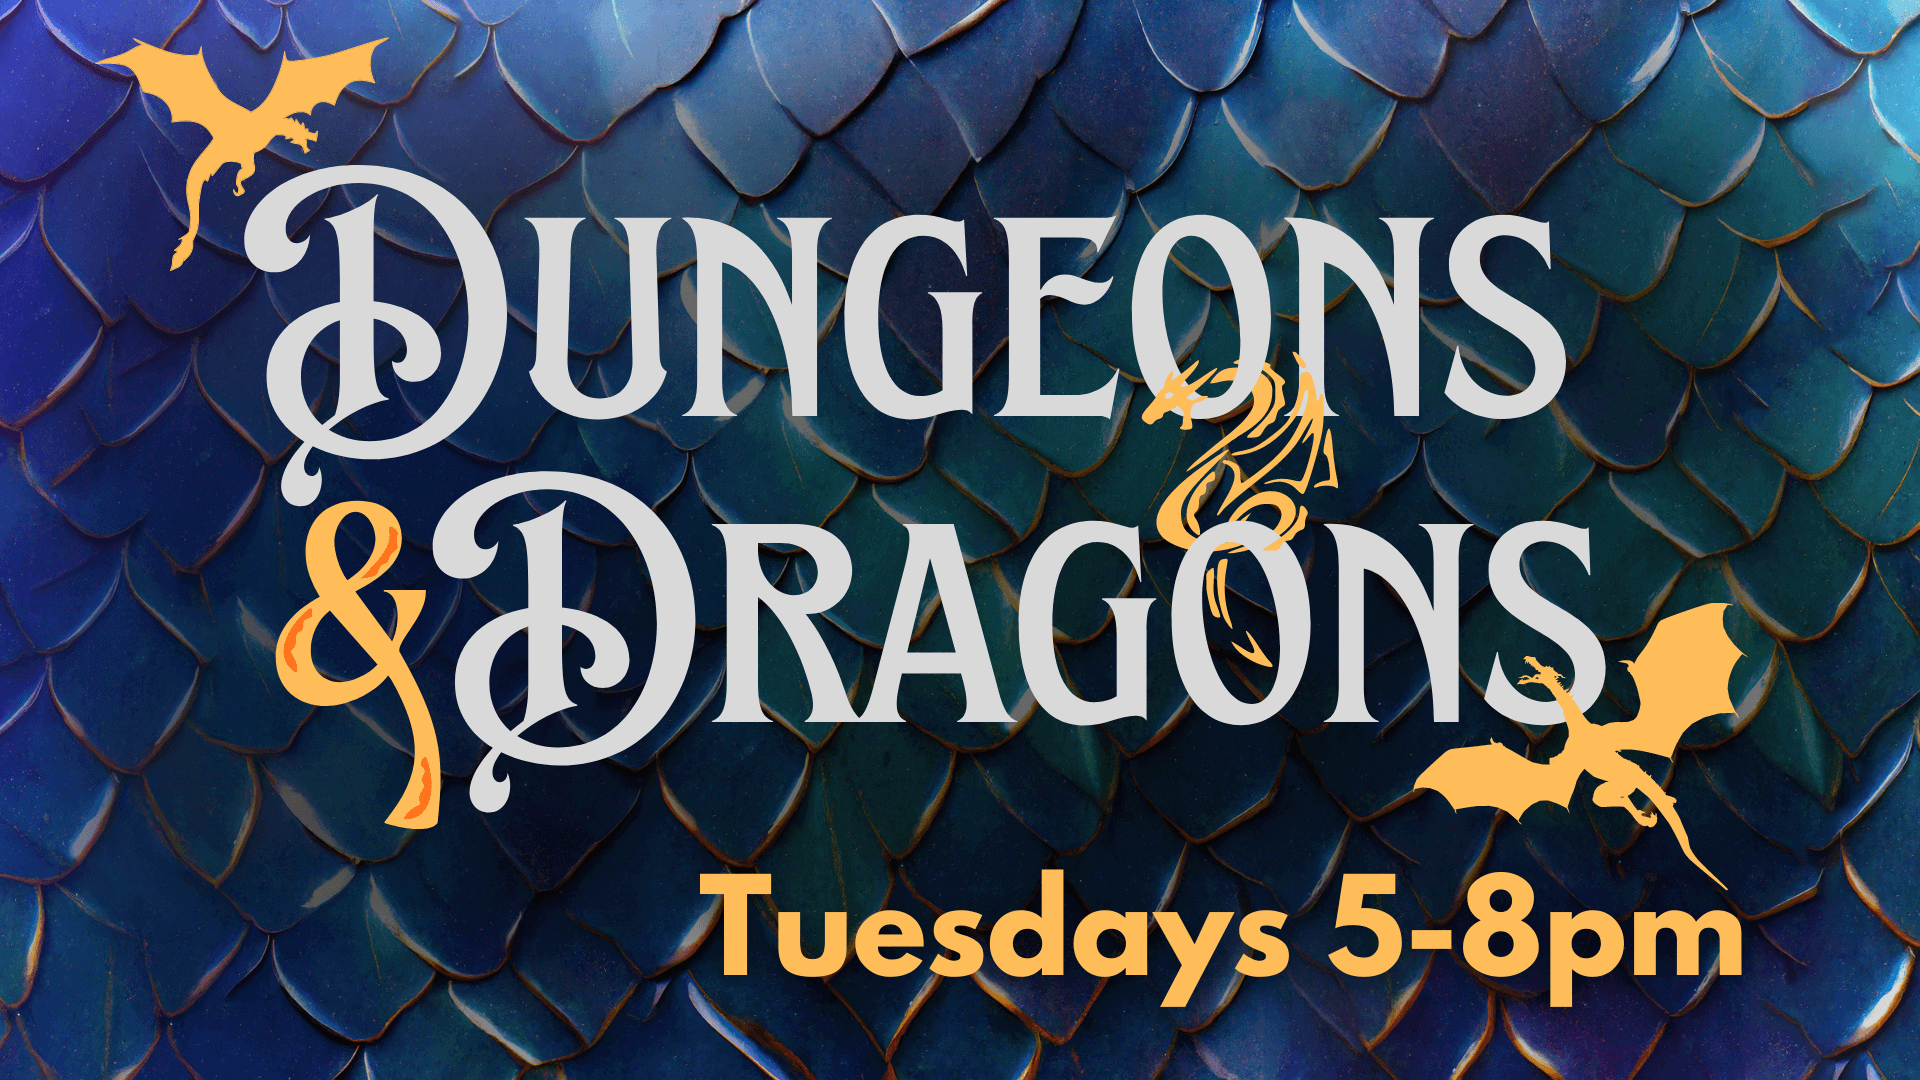 Dungeons and Dragons with blue-green scaly background and yellow dragon silhouettes